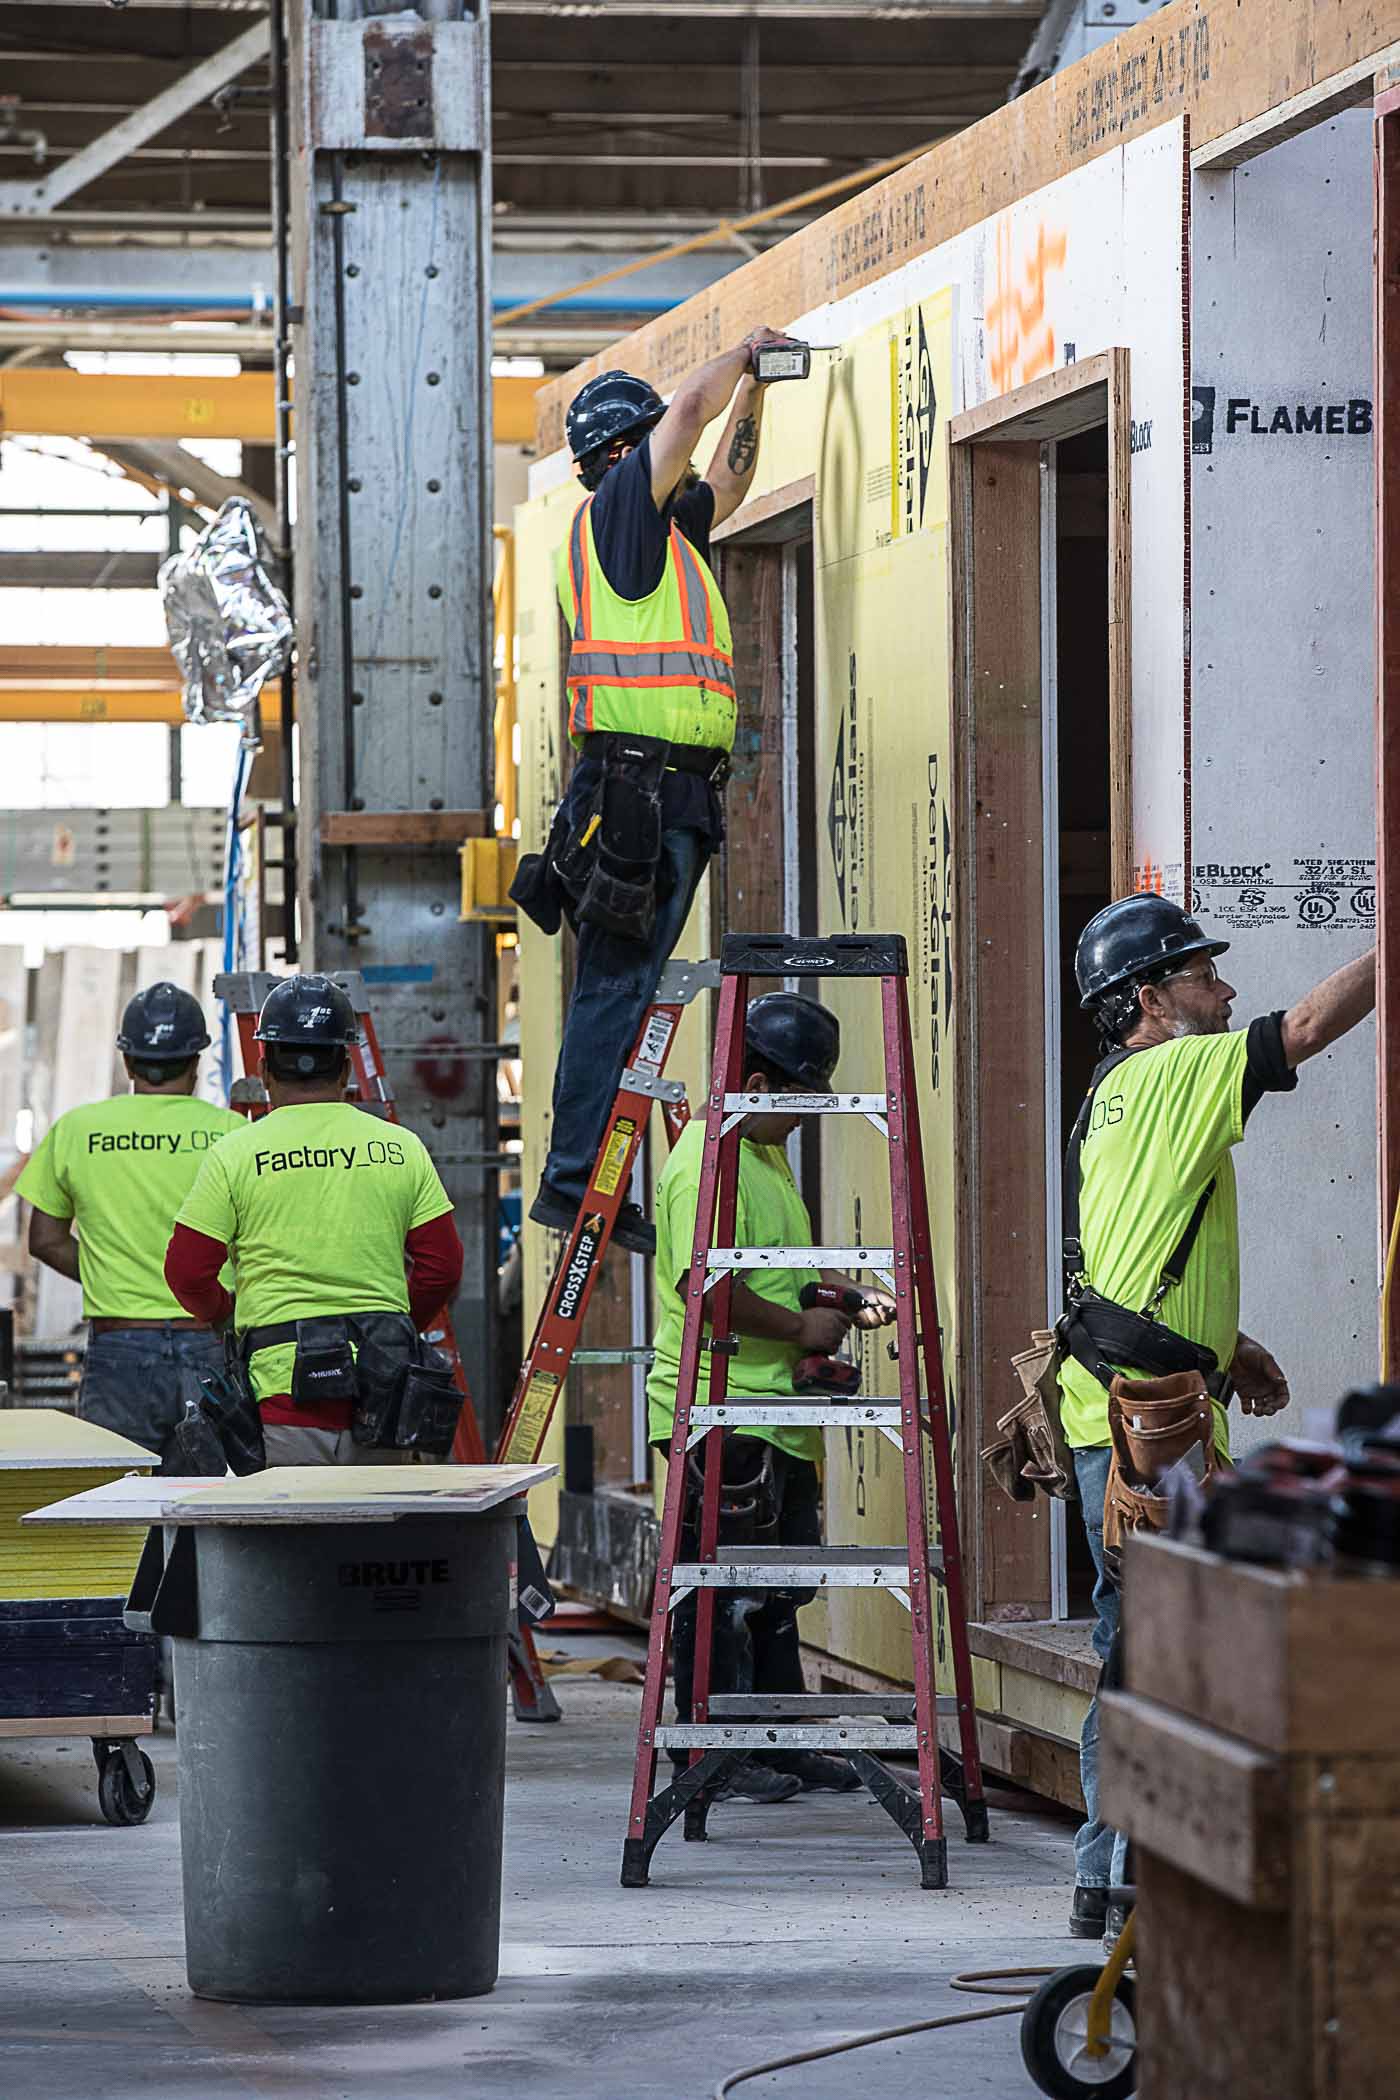 Carpenters Union Embraces Factory Built Housing To Address Labor Needs In Northern California Factory Os